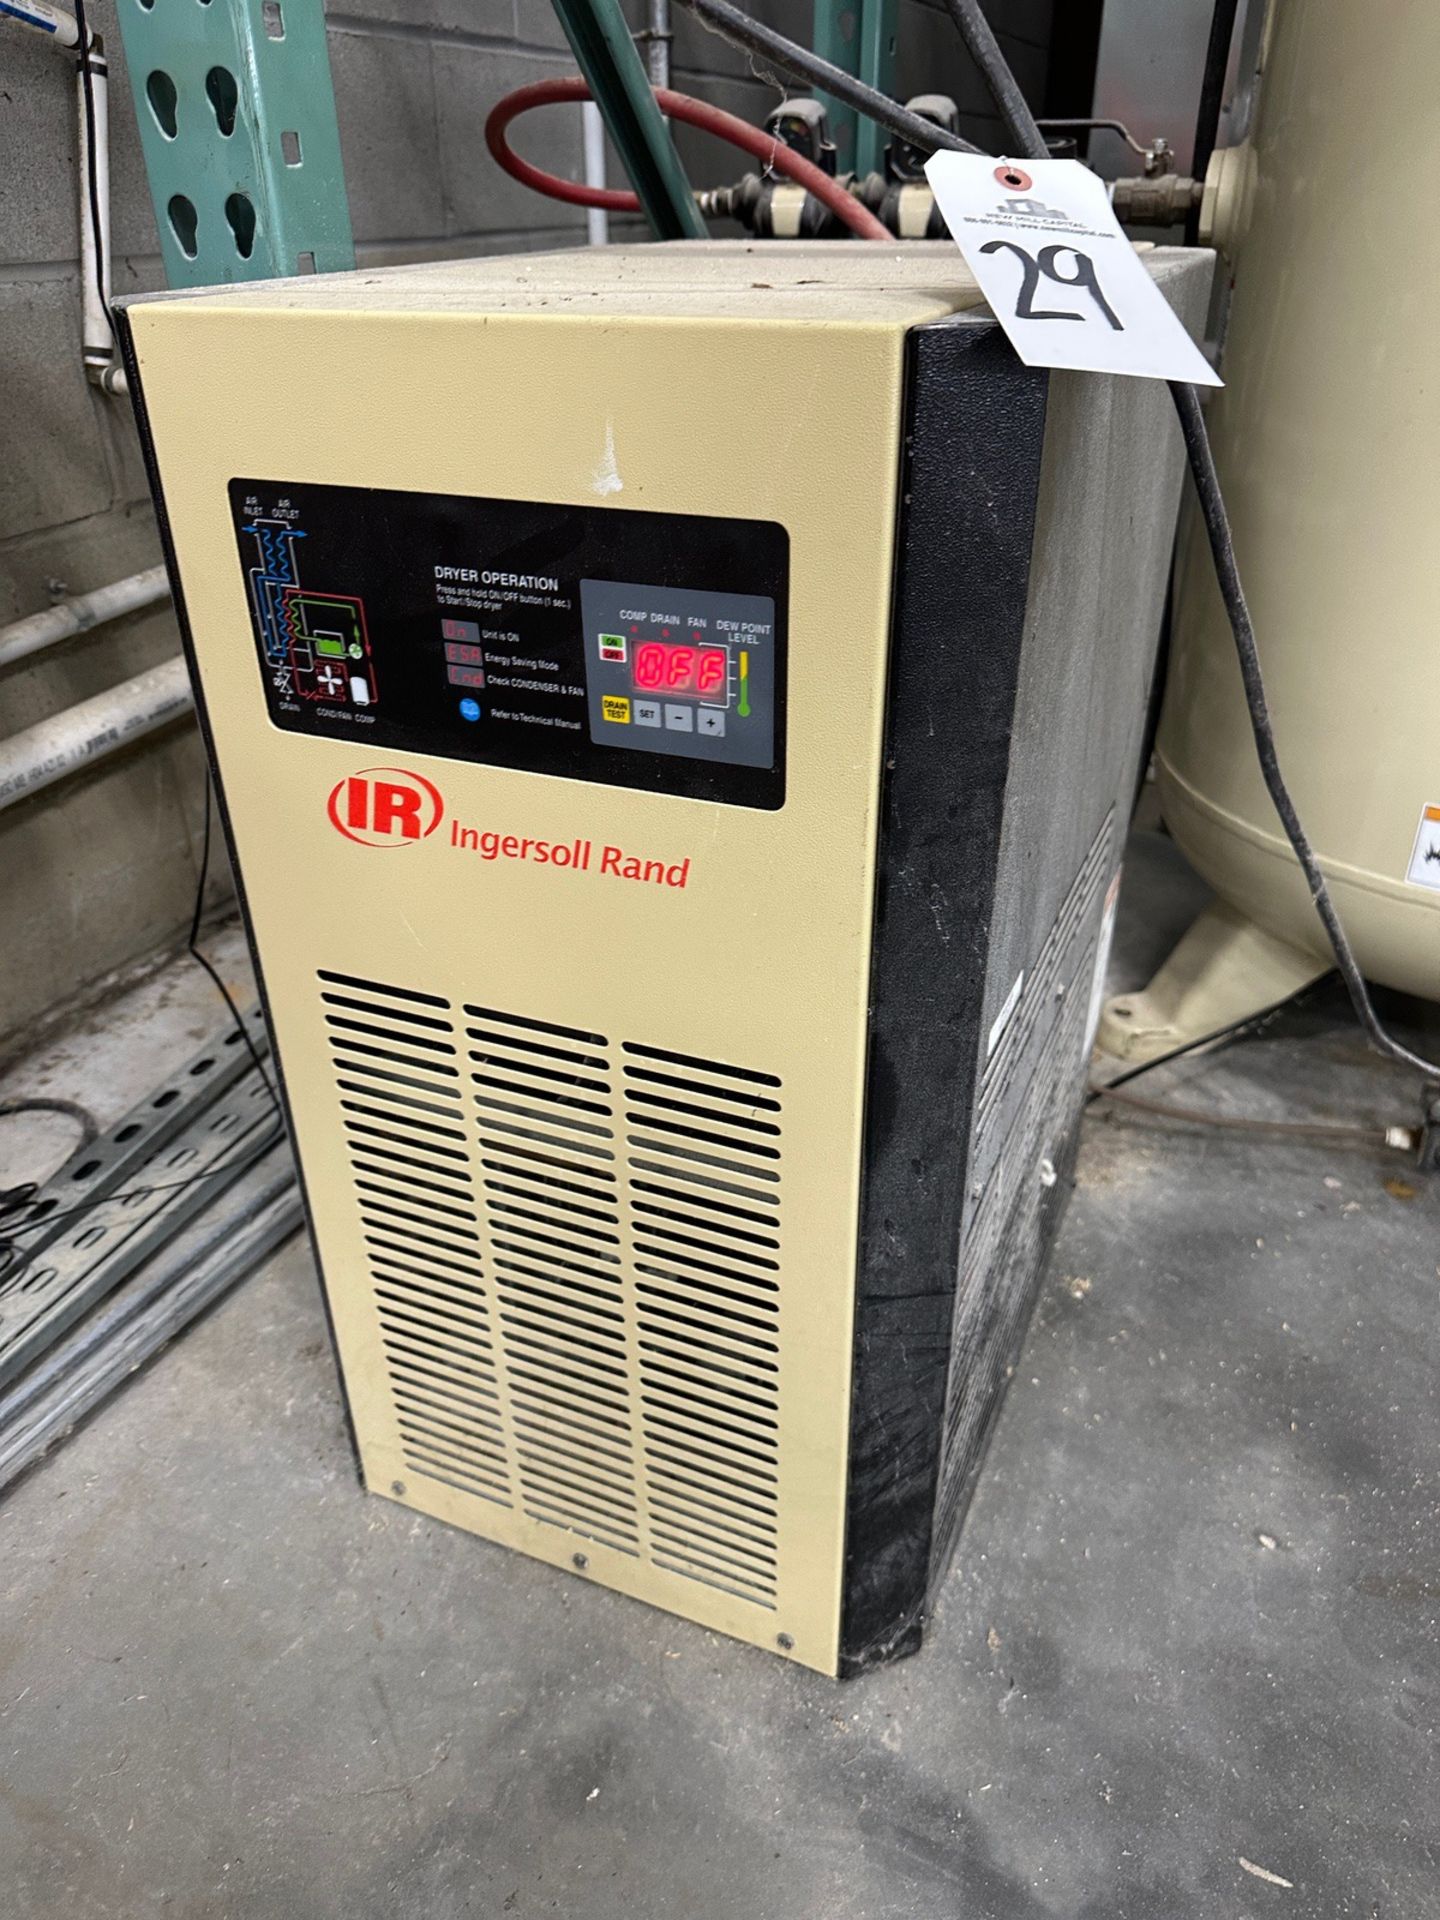 Ingersoll Rand 80 Gallon Air Compressor - Model 2475N7.5-P with Ingersoll | Rig Fee $125 - Image 2 of 7